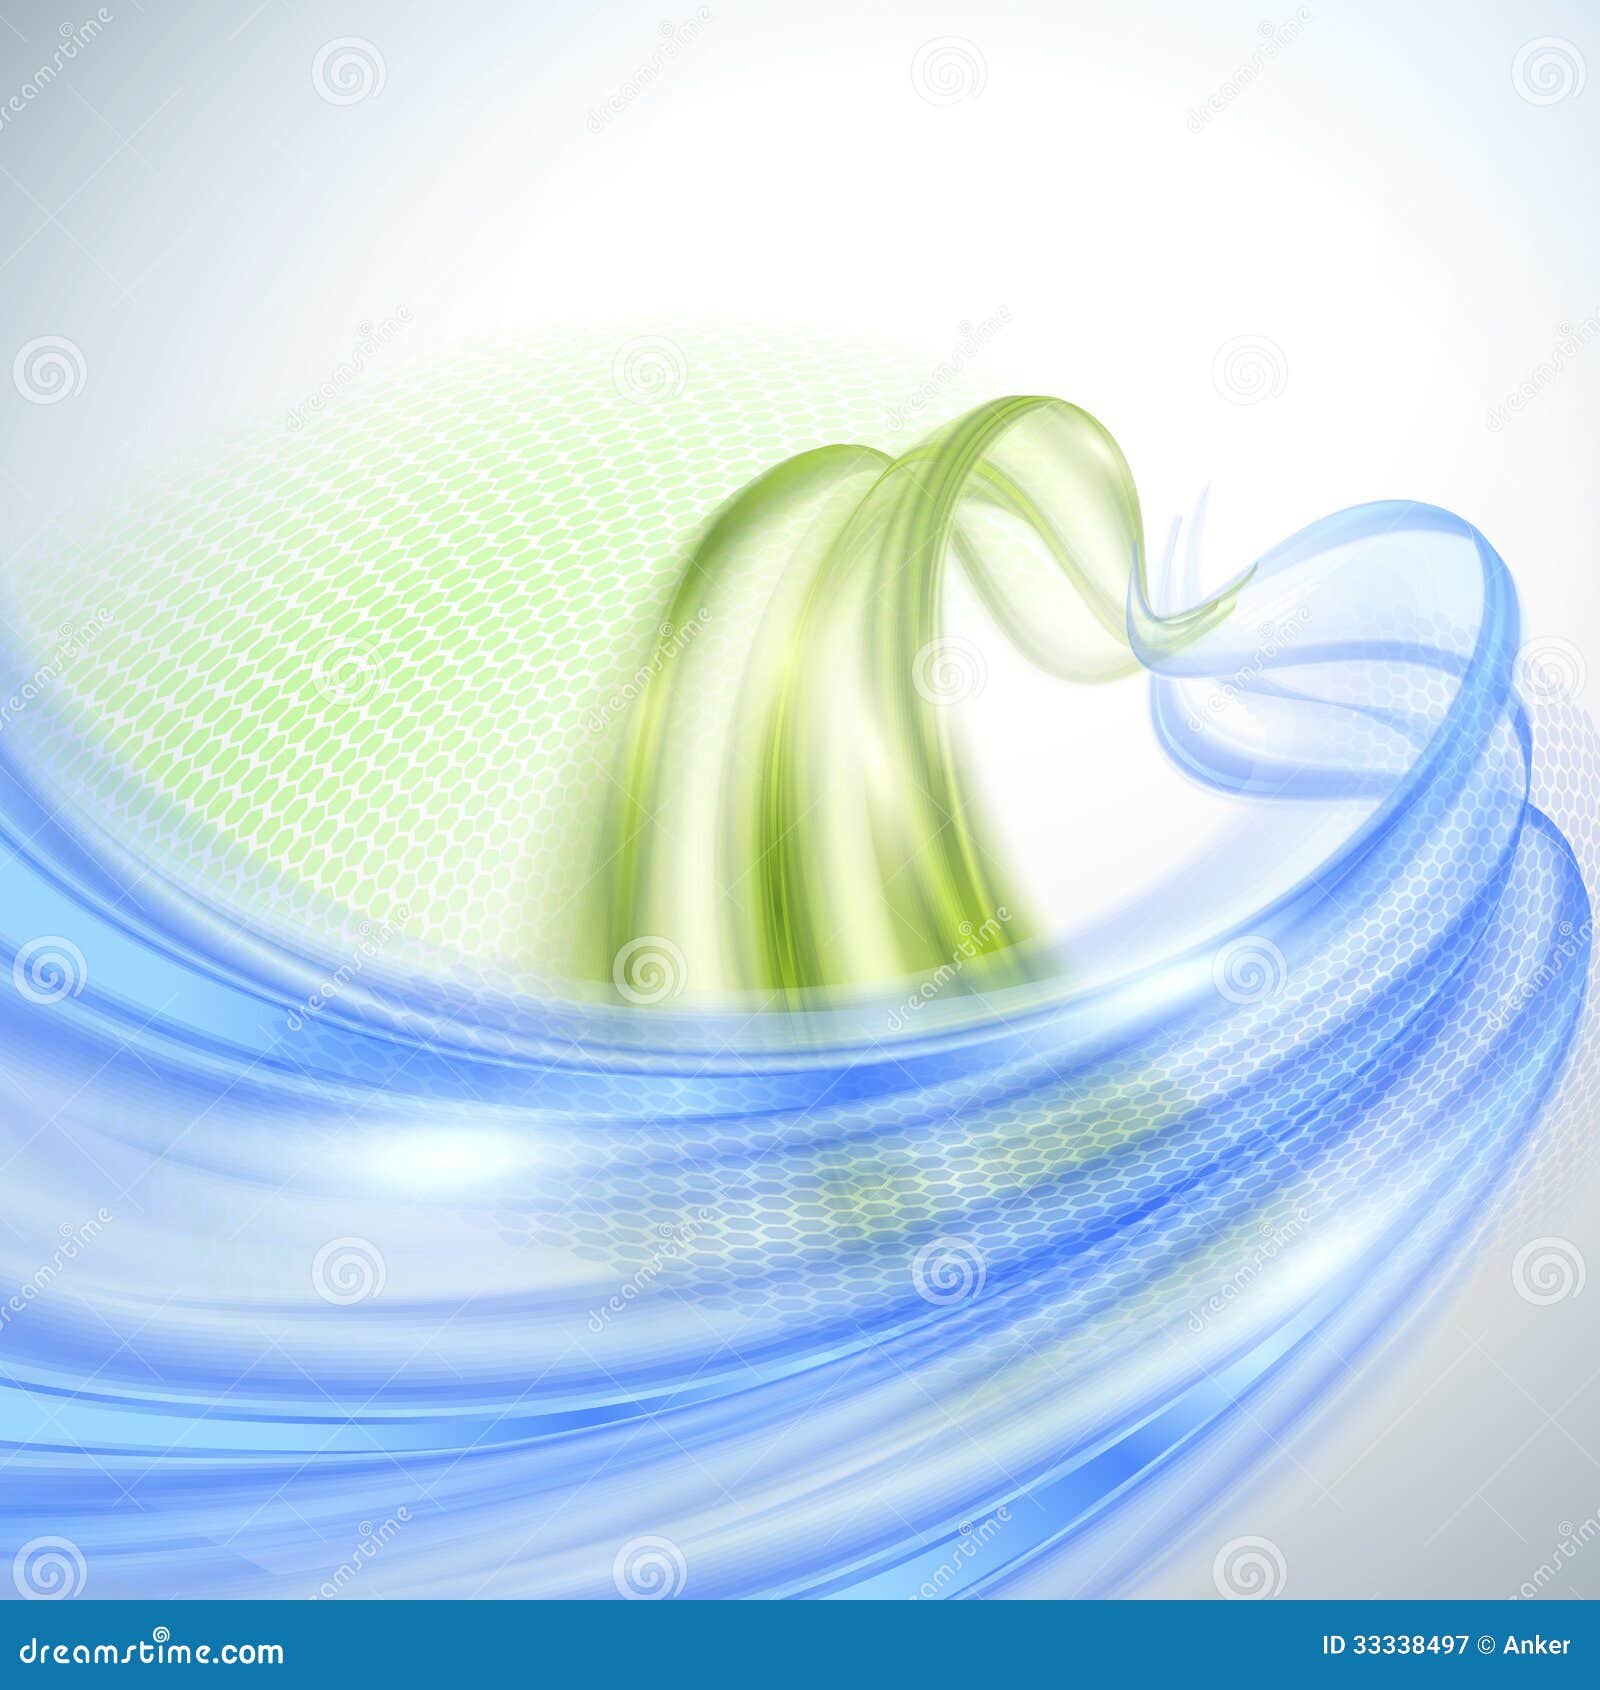  Abstract  Wave  Background  Royalty Free Stock Photography 